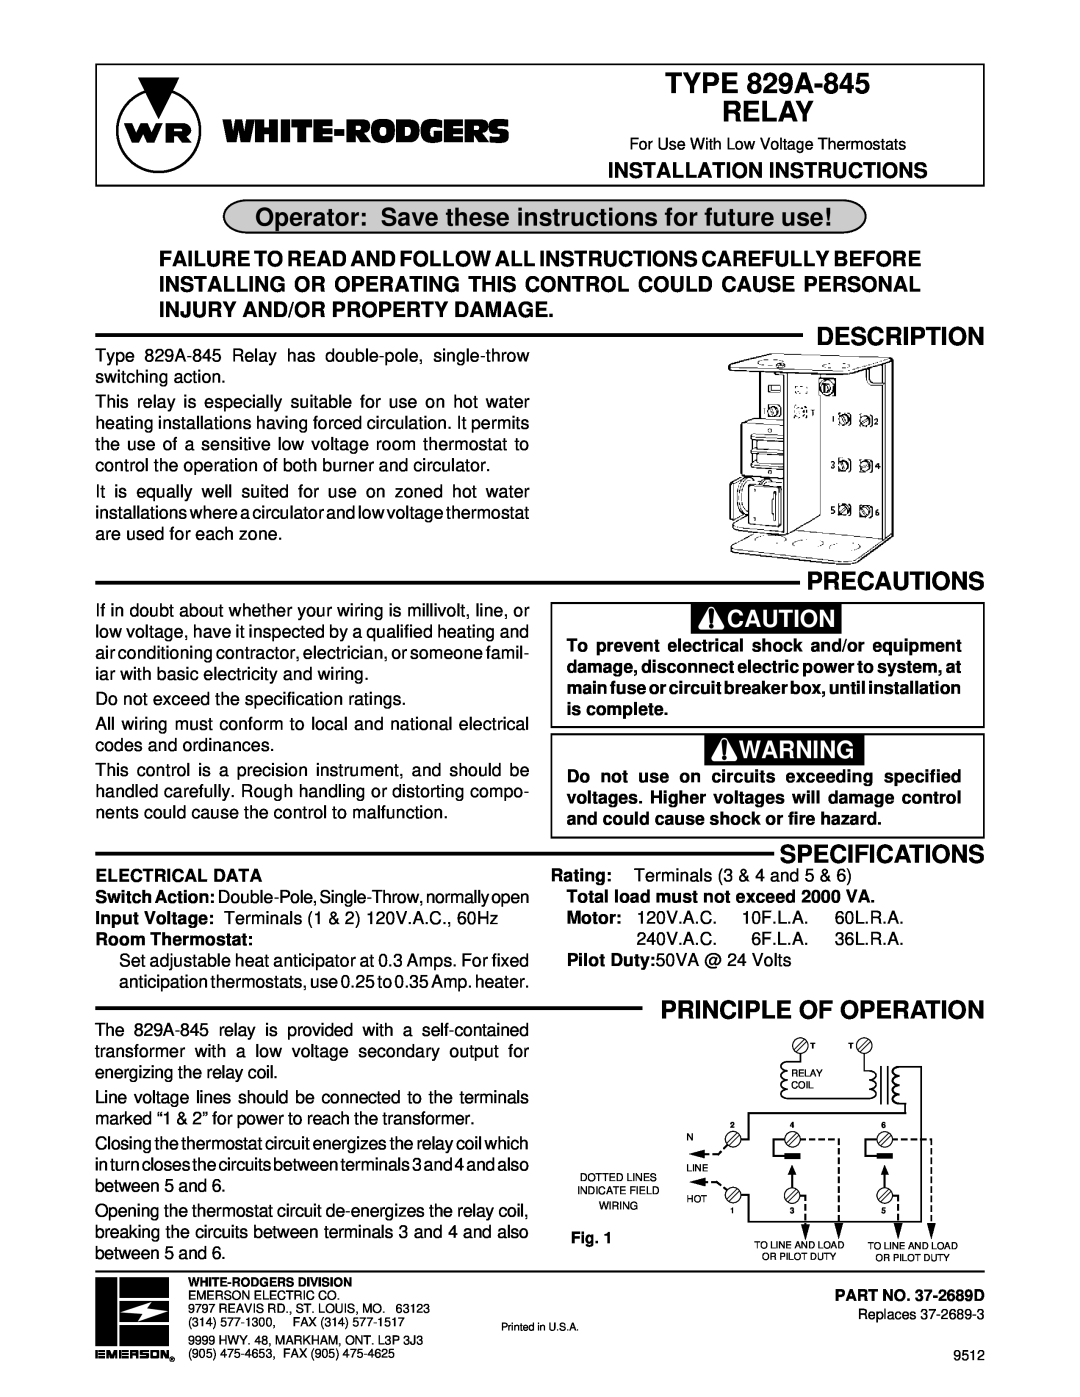 White Rodgers specifications White-Rodgers, TYPE 829A-845 RELAY, Operator Save these instructions for future use 